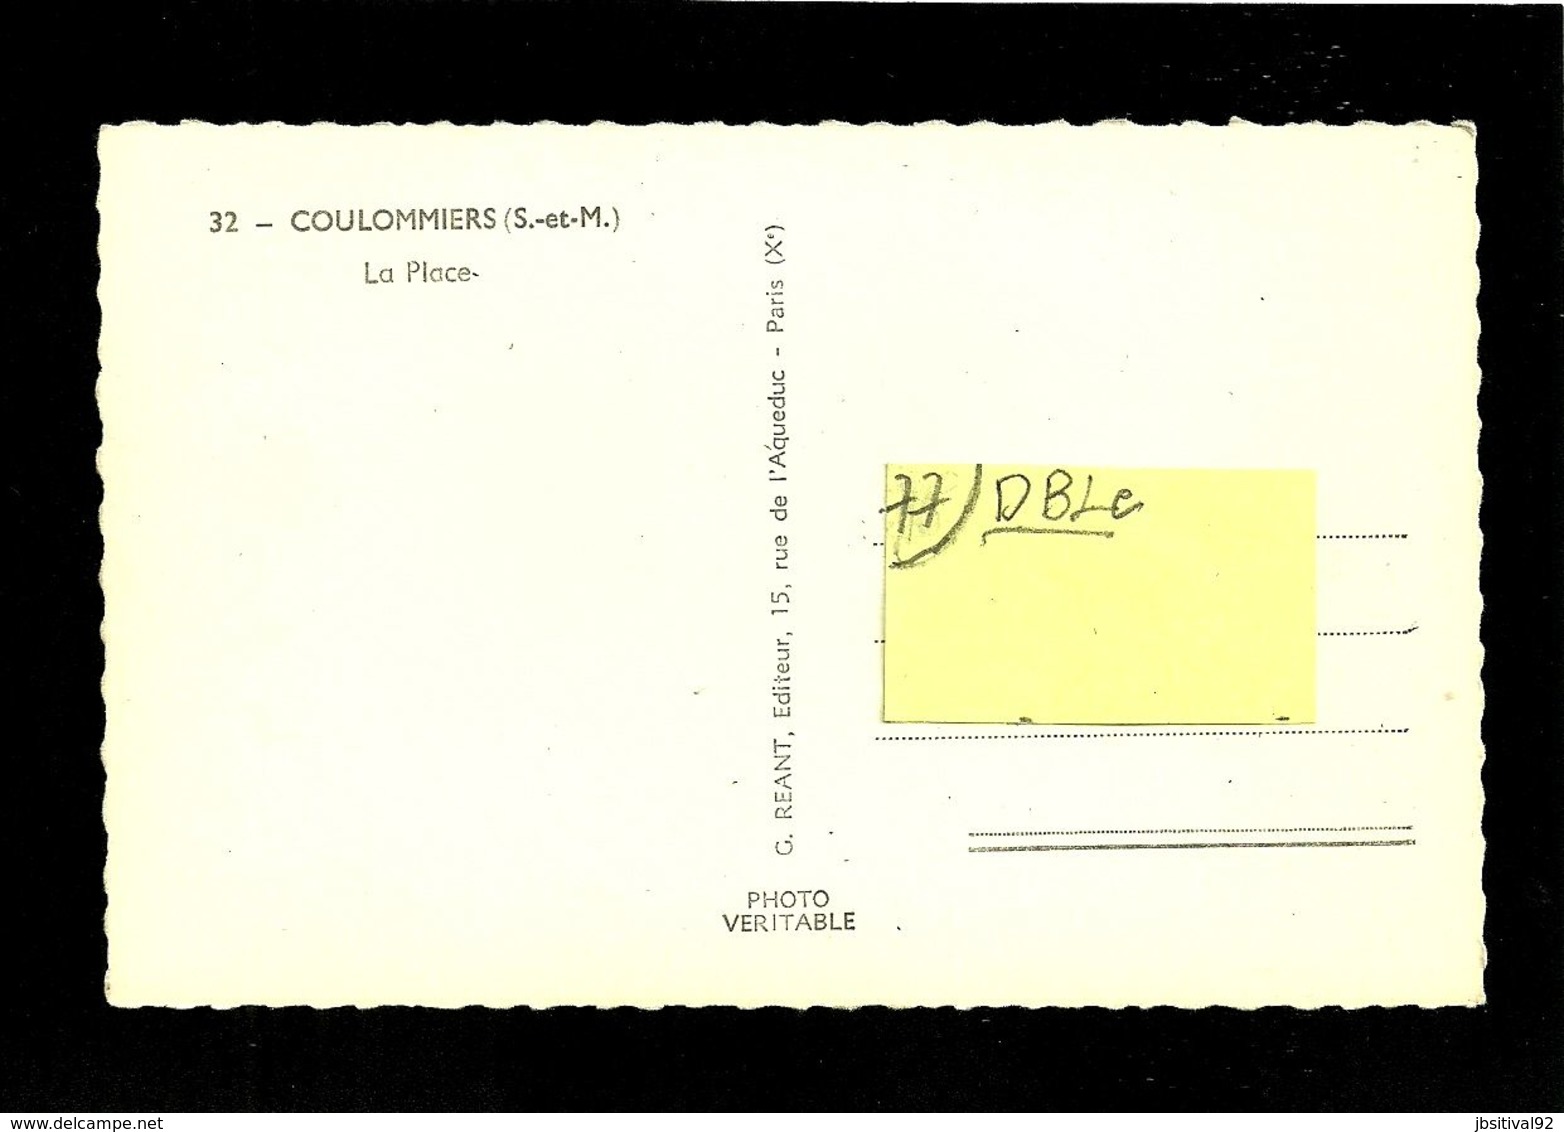 77  COULOMMIERS  N° 32 Anciennes  Voitures  LA PLACE  Goulet Turpin - Coulommiers